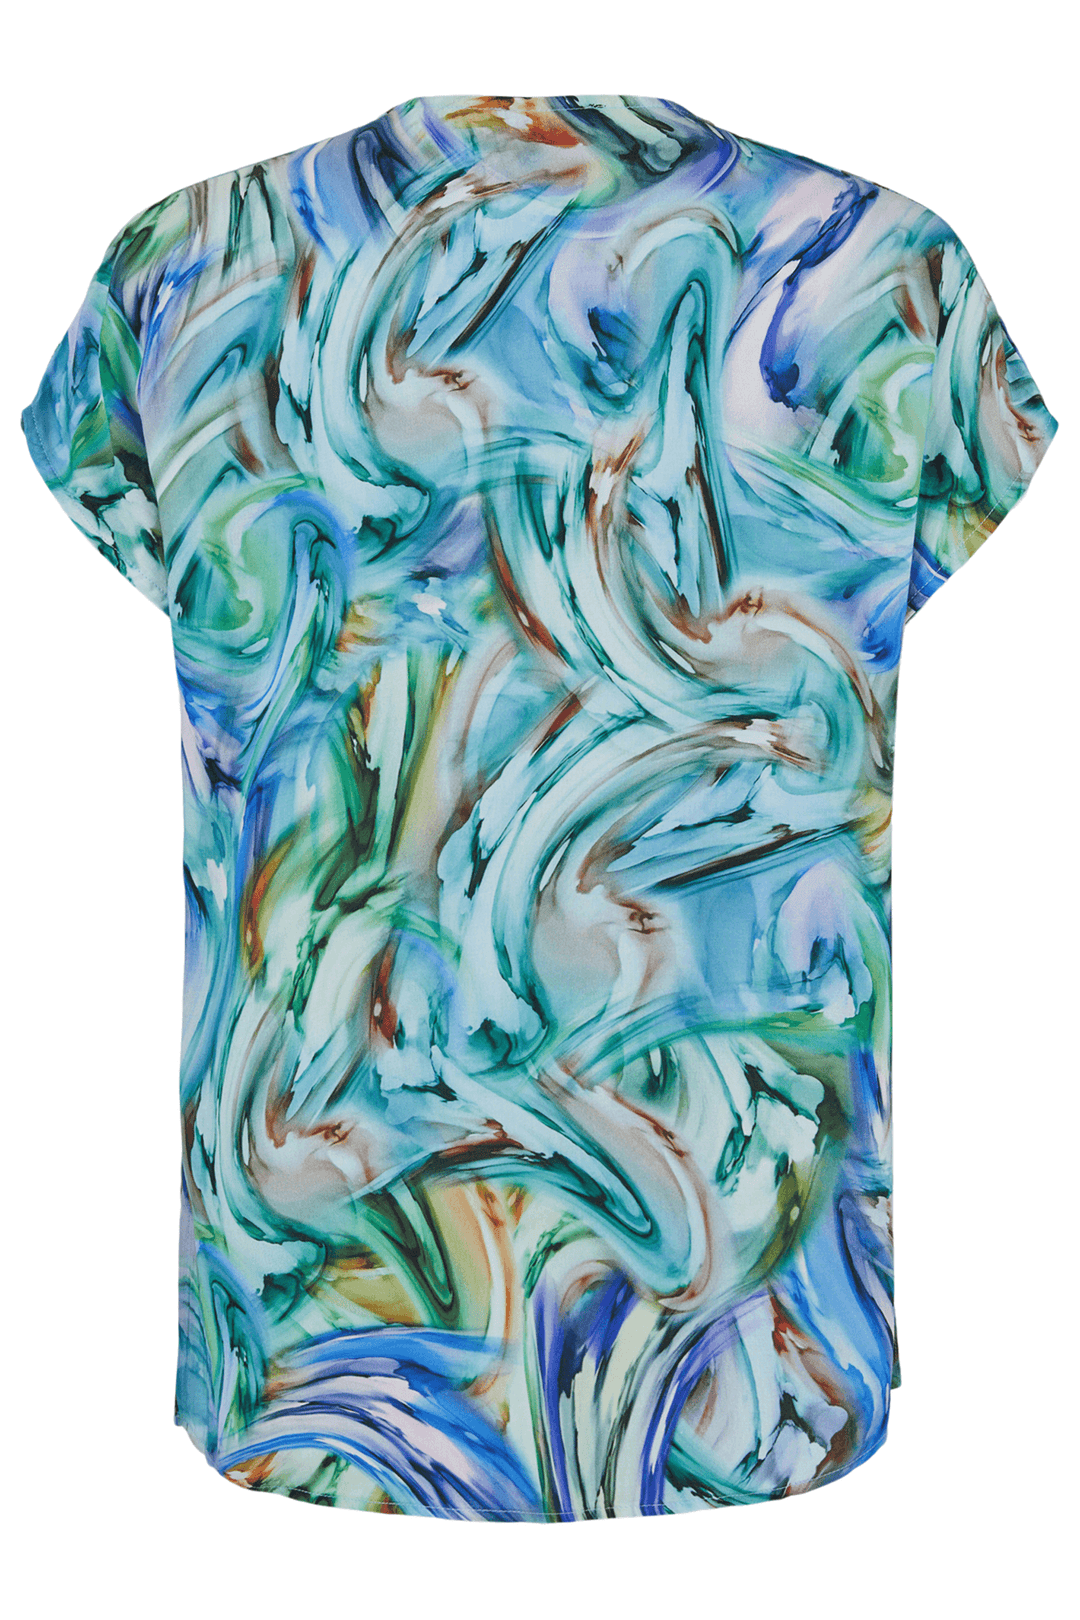 Sunday 6664 Blue Watercolour Marbled Top